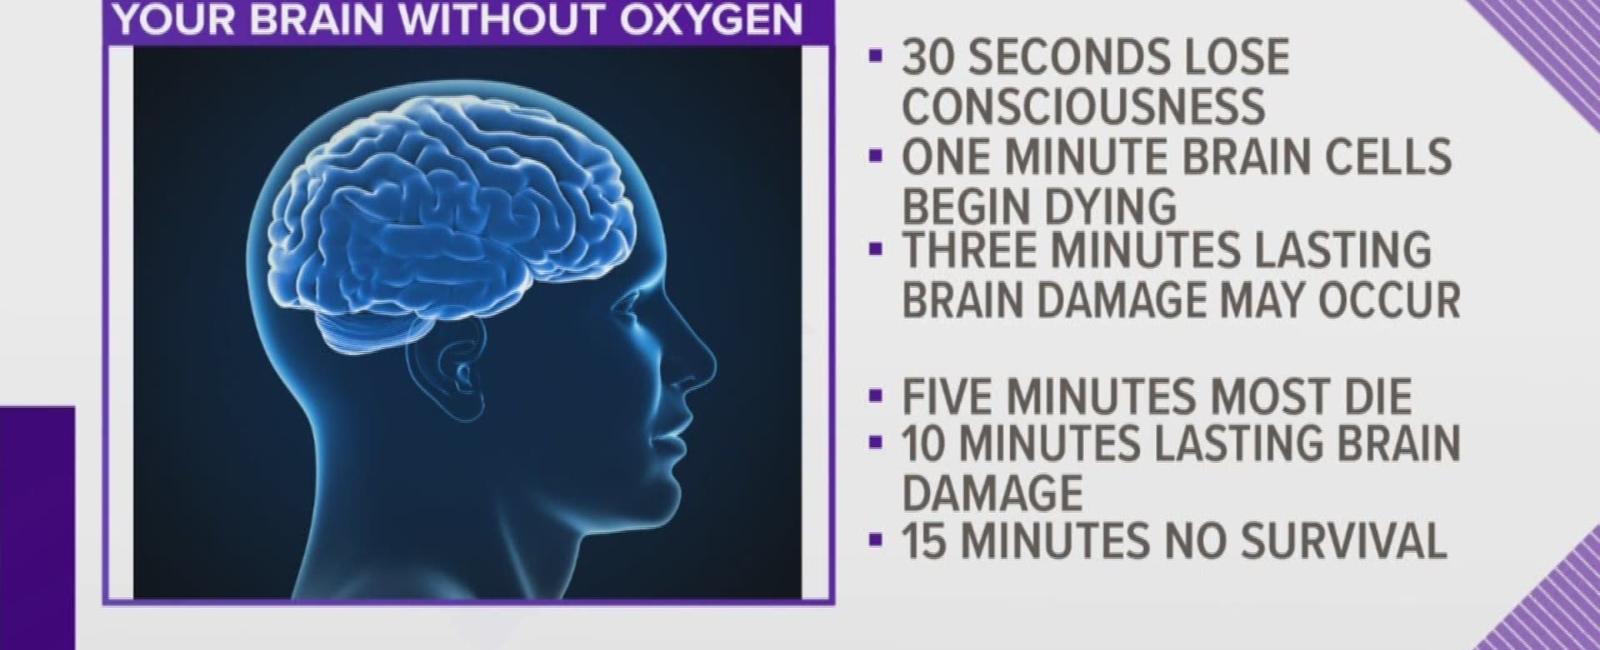 Your brain can survive for five to 10 minutes without oxygen